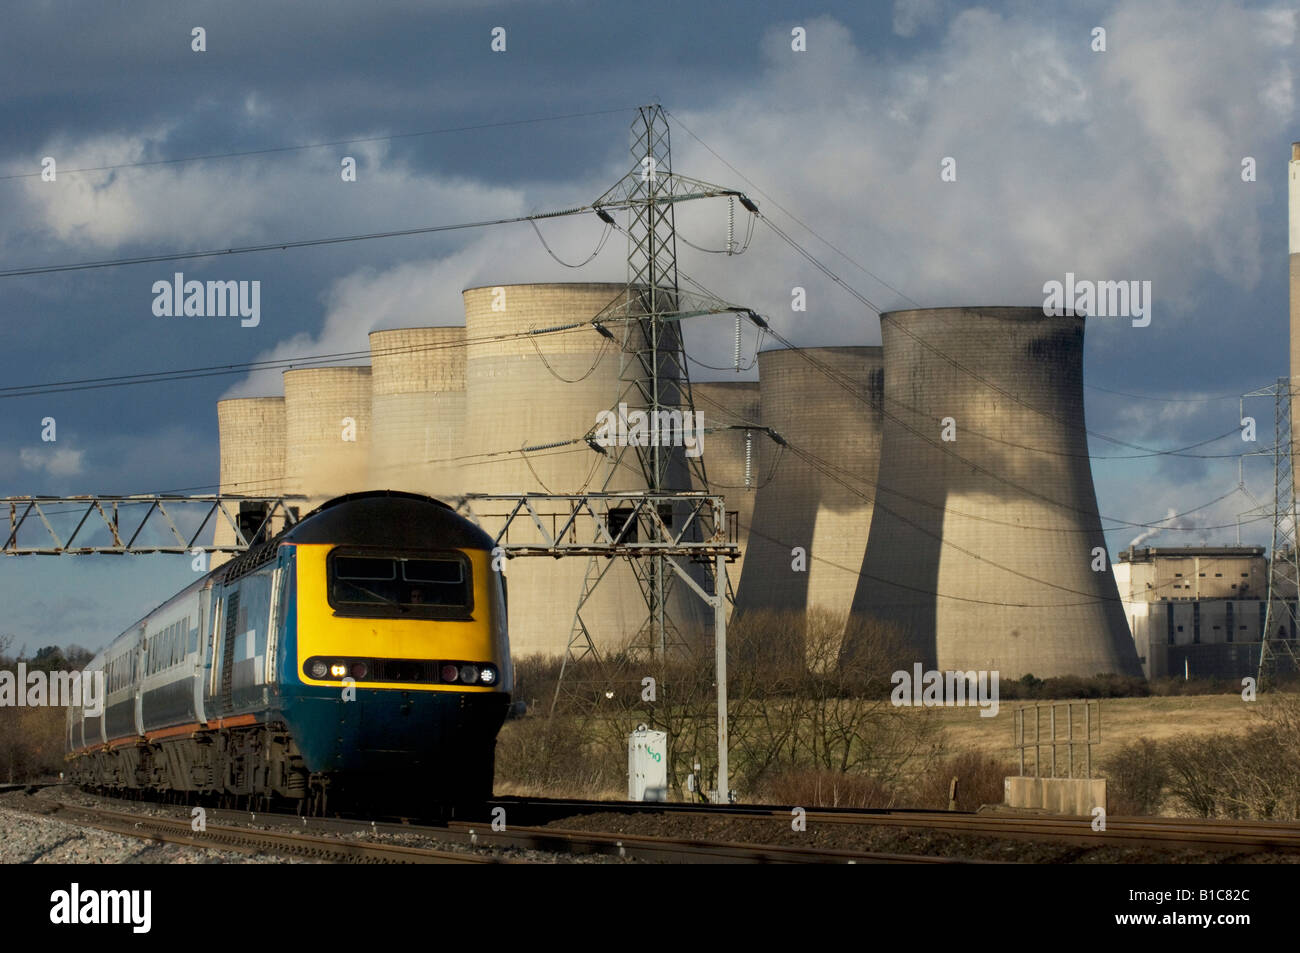 An East Midlands Trains High Speed Train passes the cooling towers of E.ON Ratcliffe on Soar coal fired power station Stock Photo